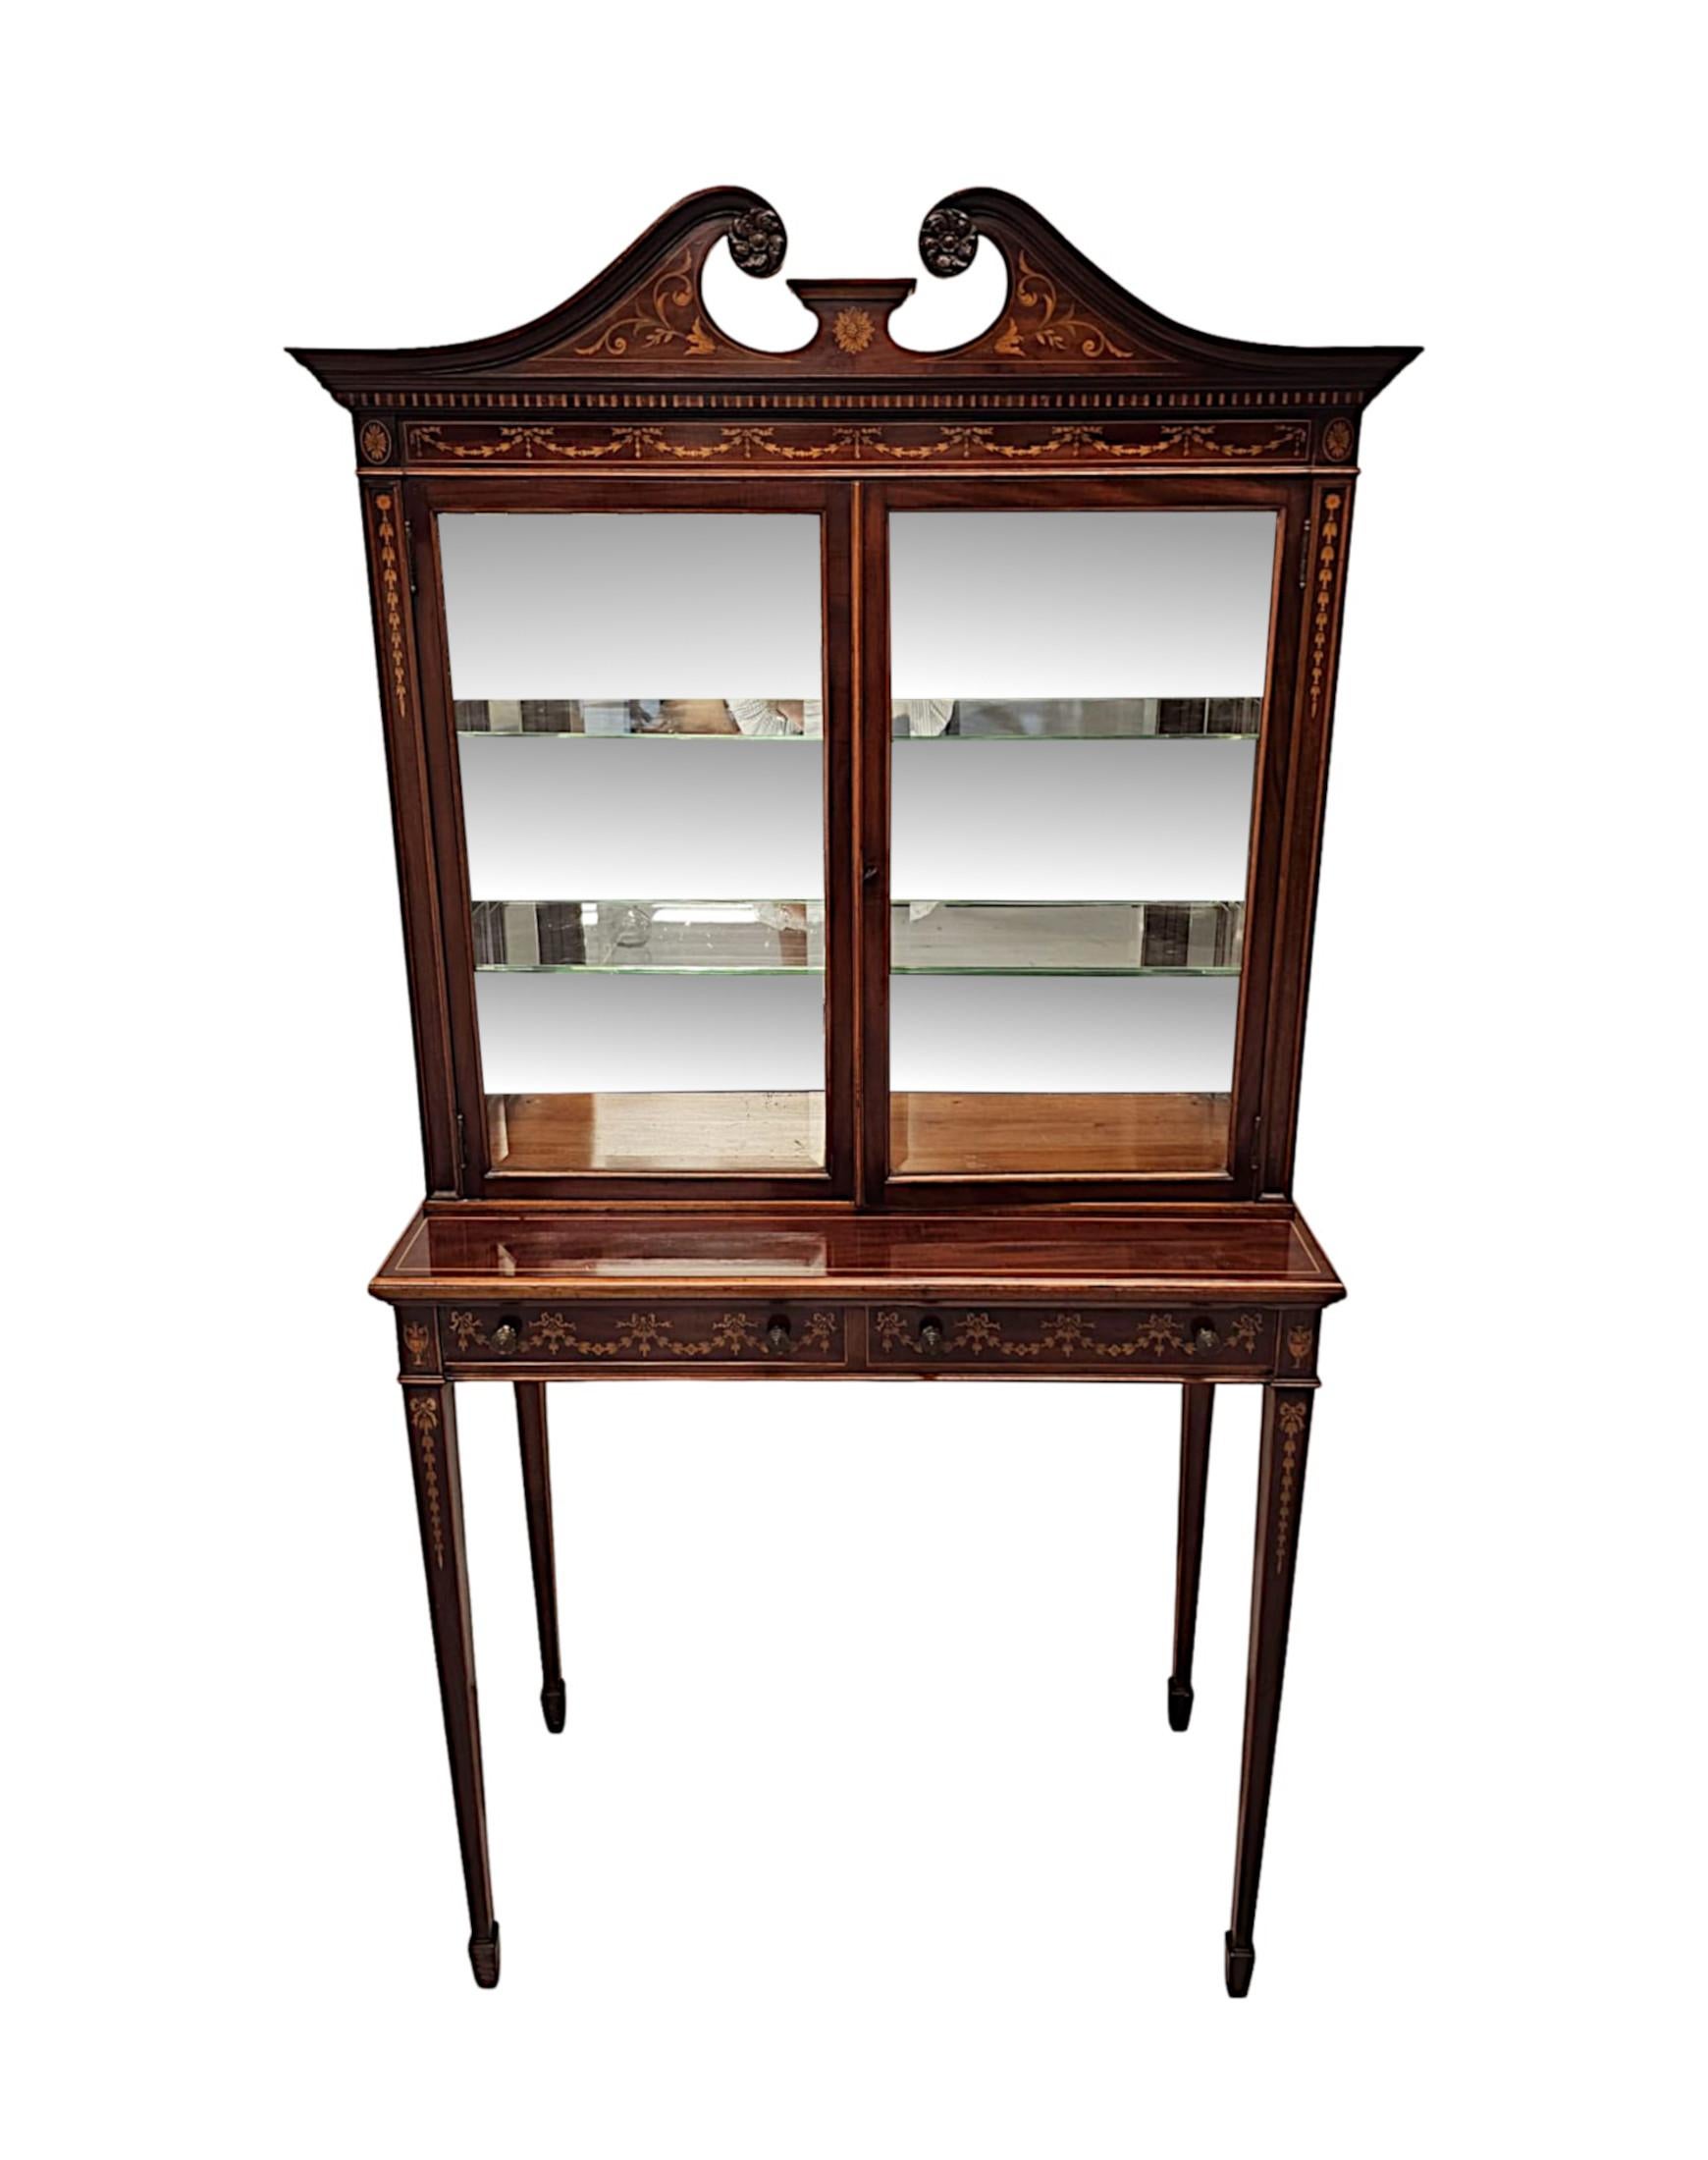 English A Rare Pair of Edwardian Pier Cabinets or Bookcases after Edward and Roberts For Sale